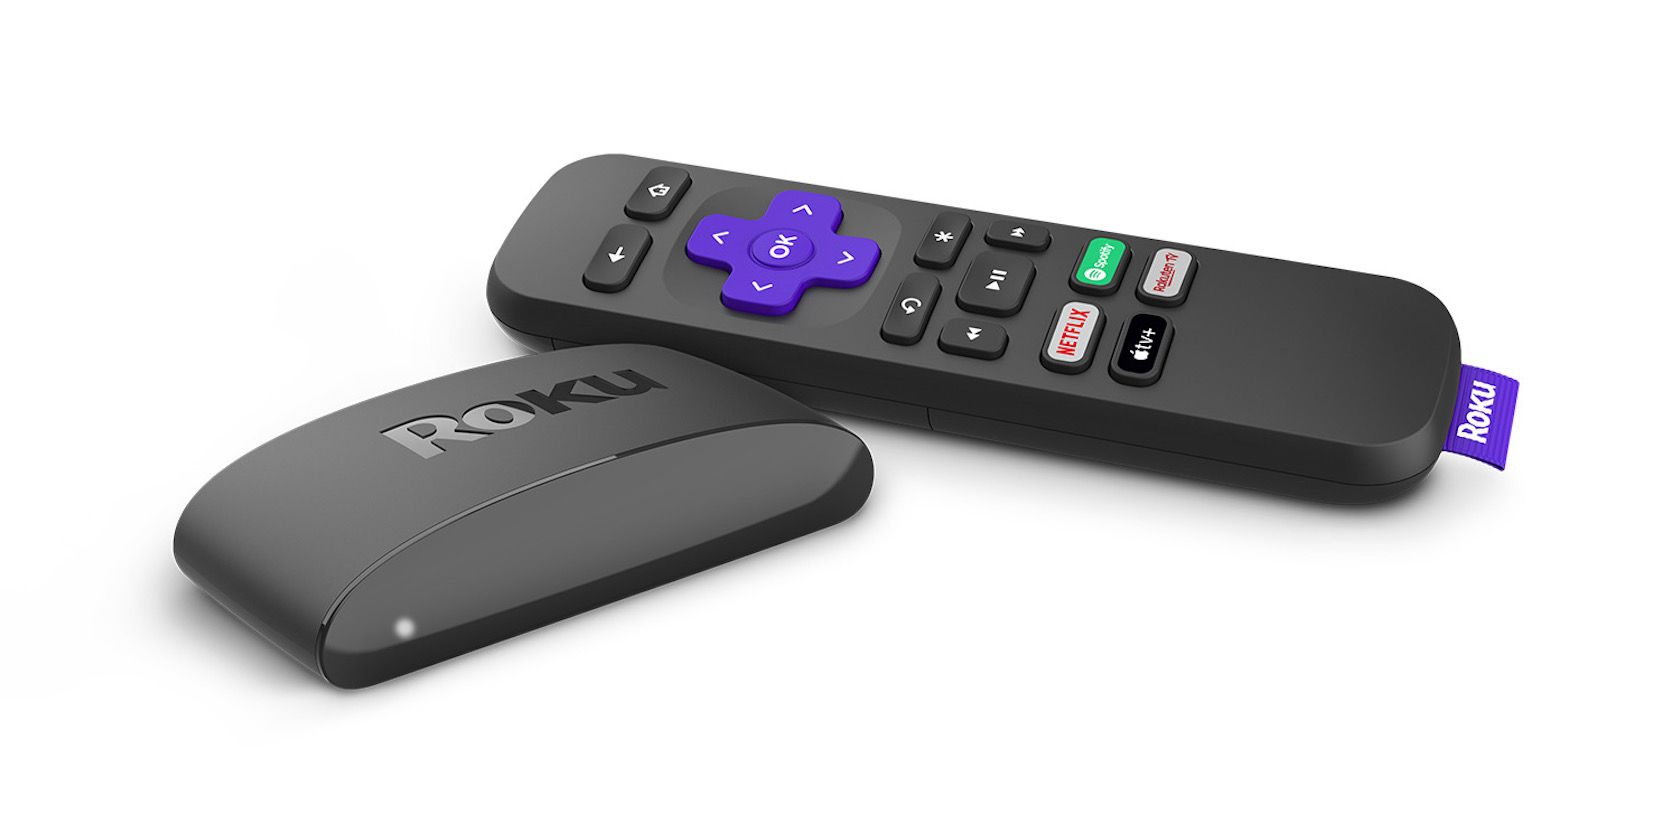 roku express remote buttons explained